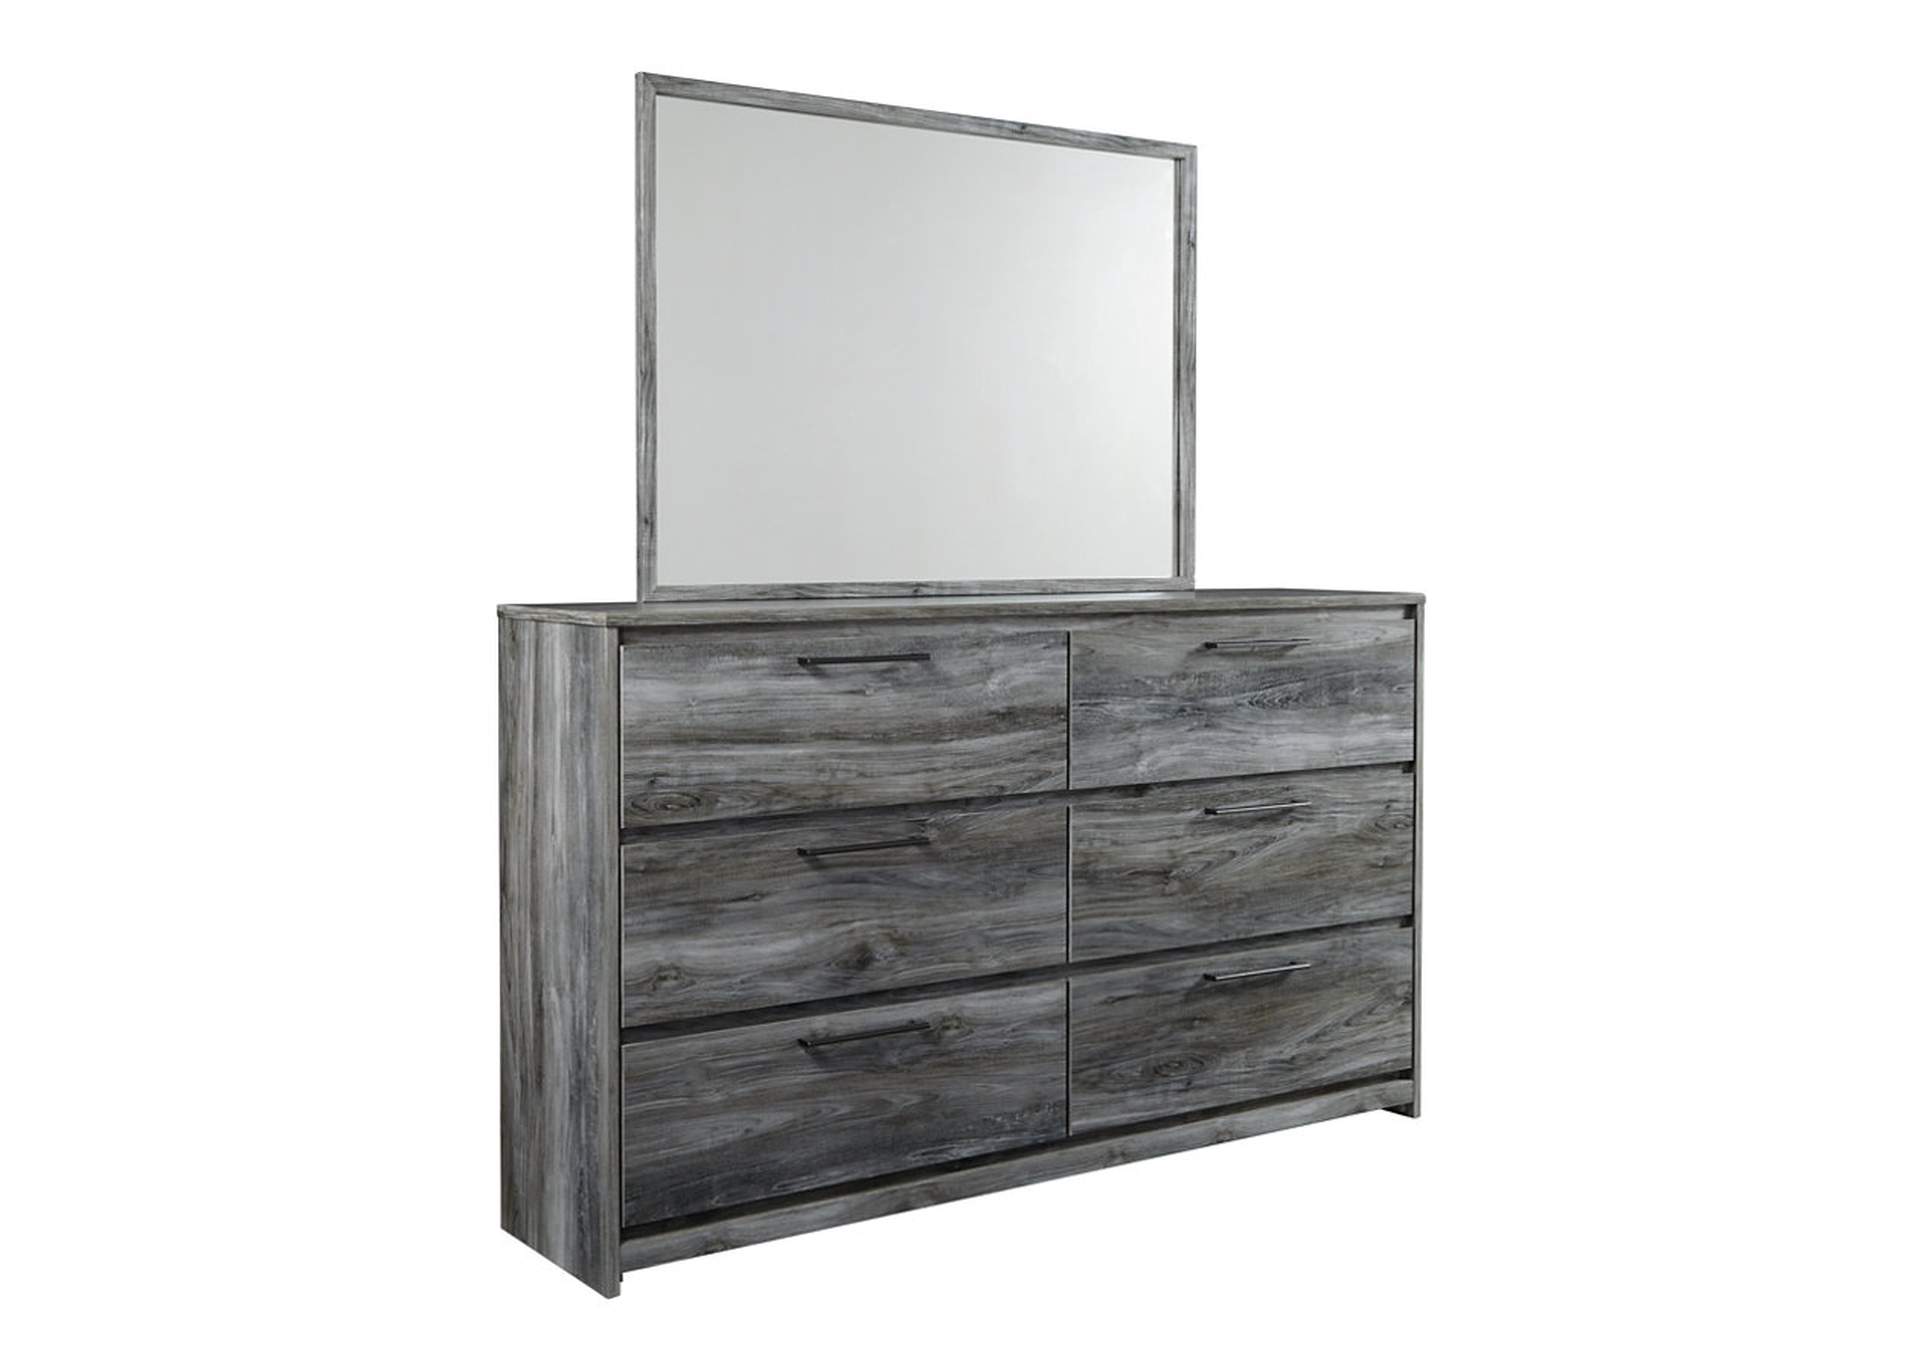 Baystorm Twin Panel Headboard with Mirrored Dresser and Nightstand,Signature Design By Ashley